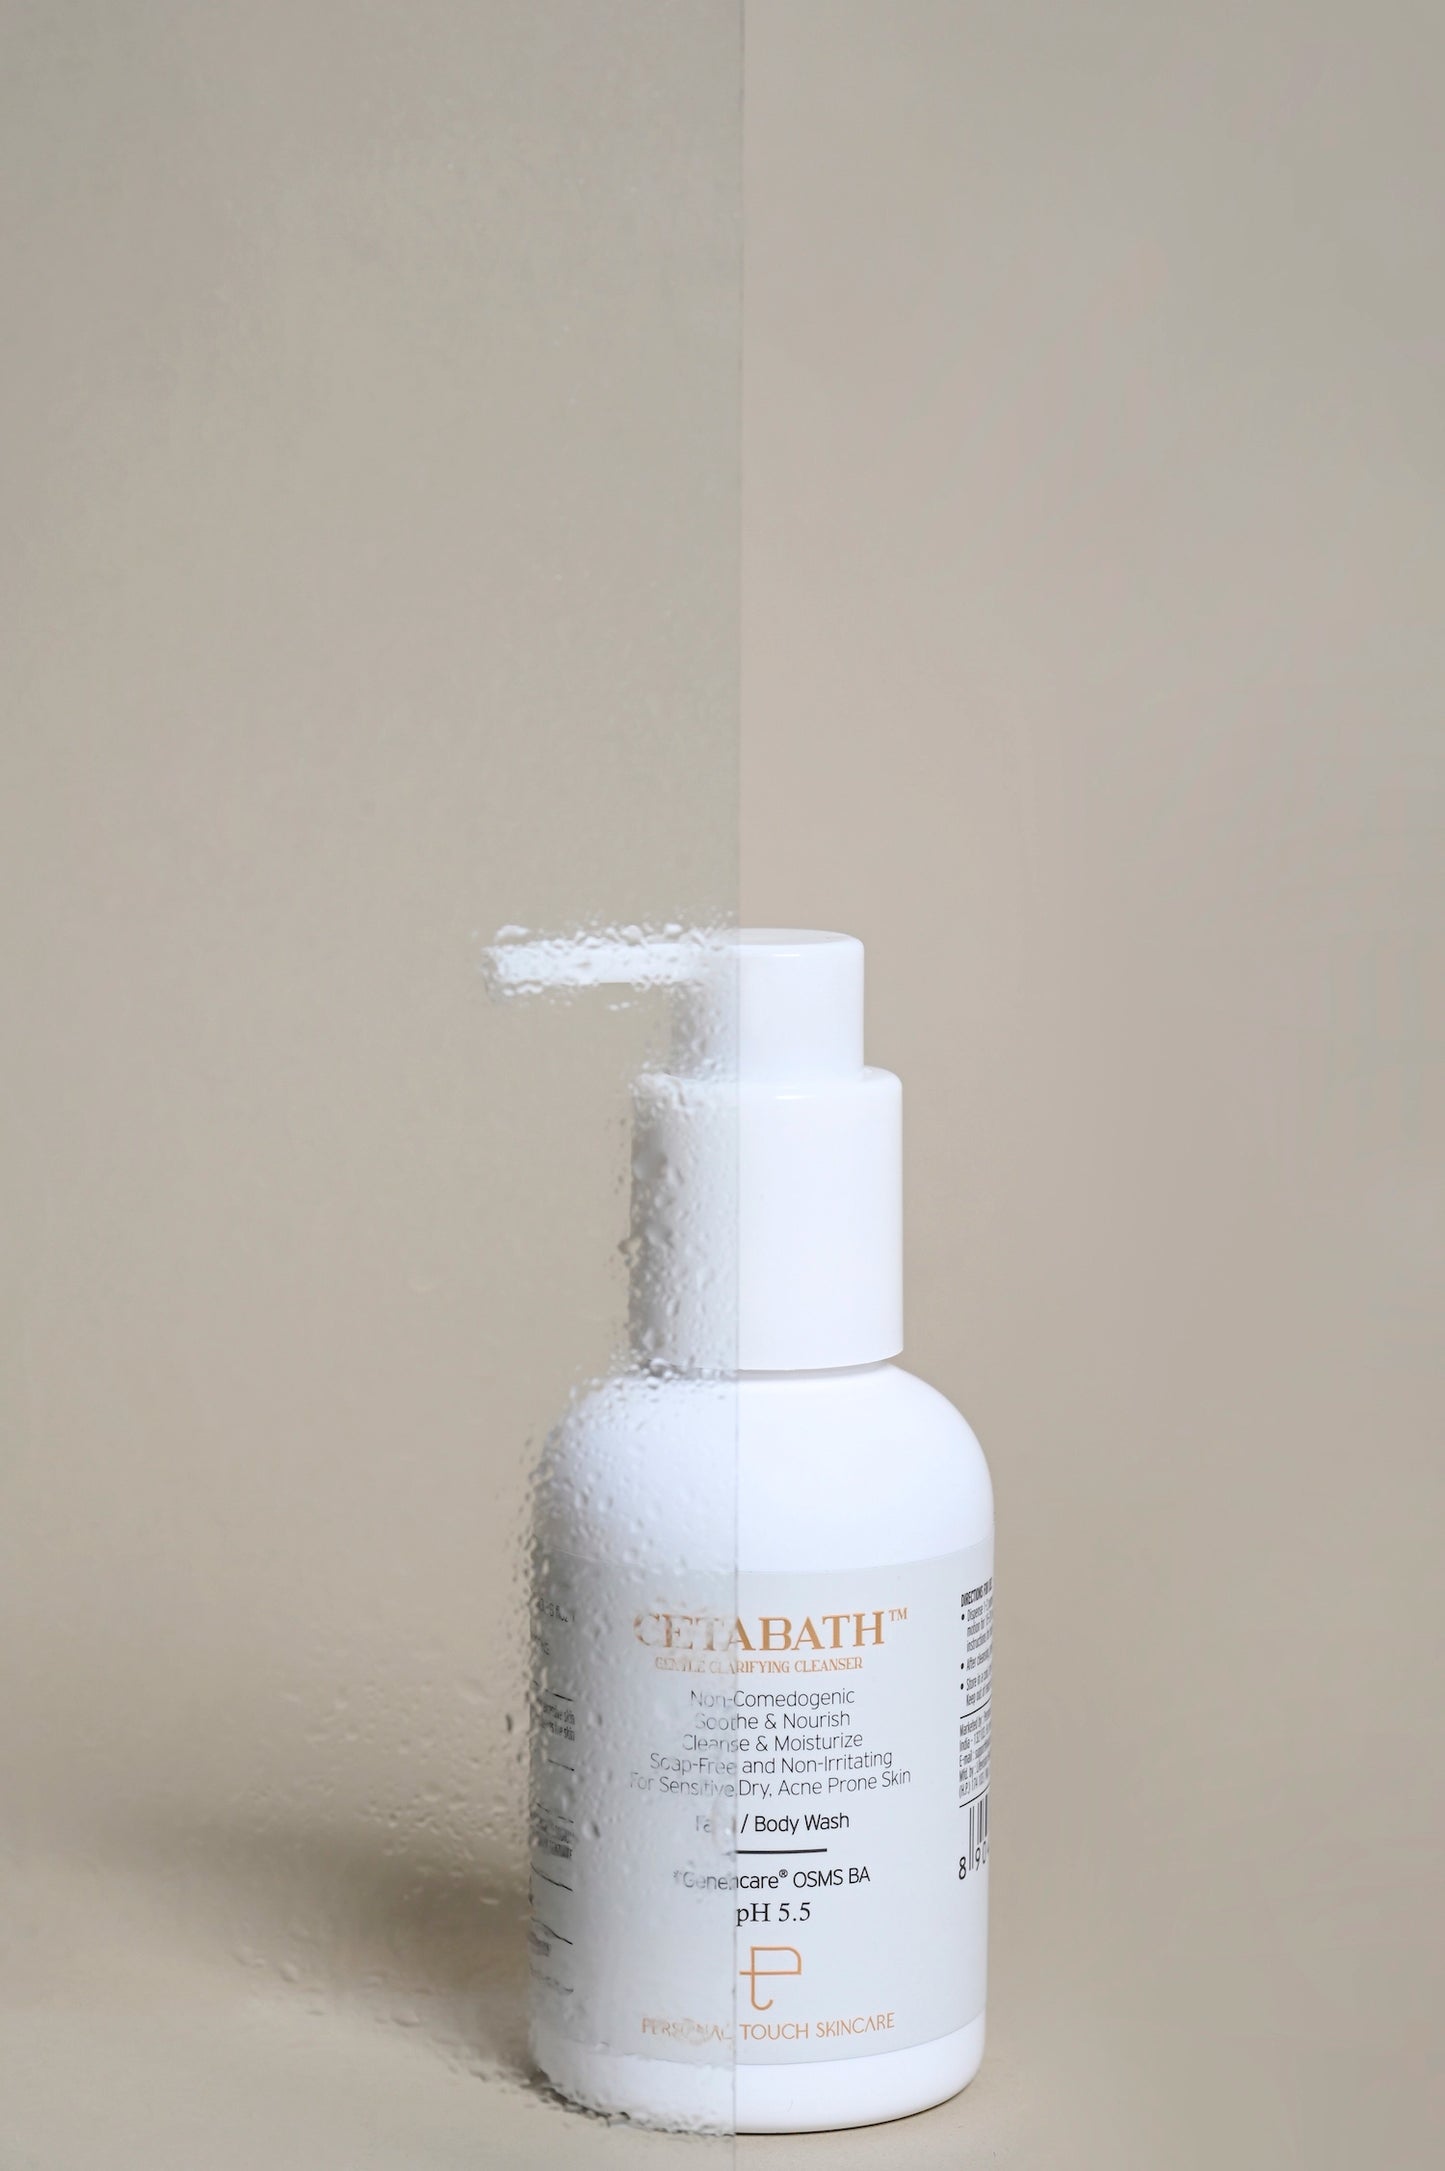 Cetabath - Cleanser For Sensitive, Dry & Acne-Prone Skin